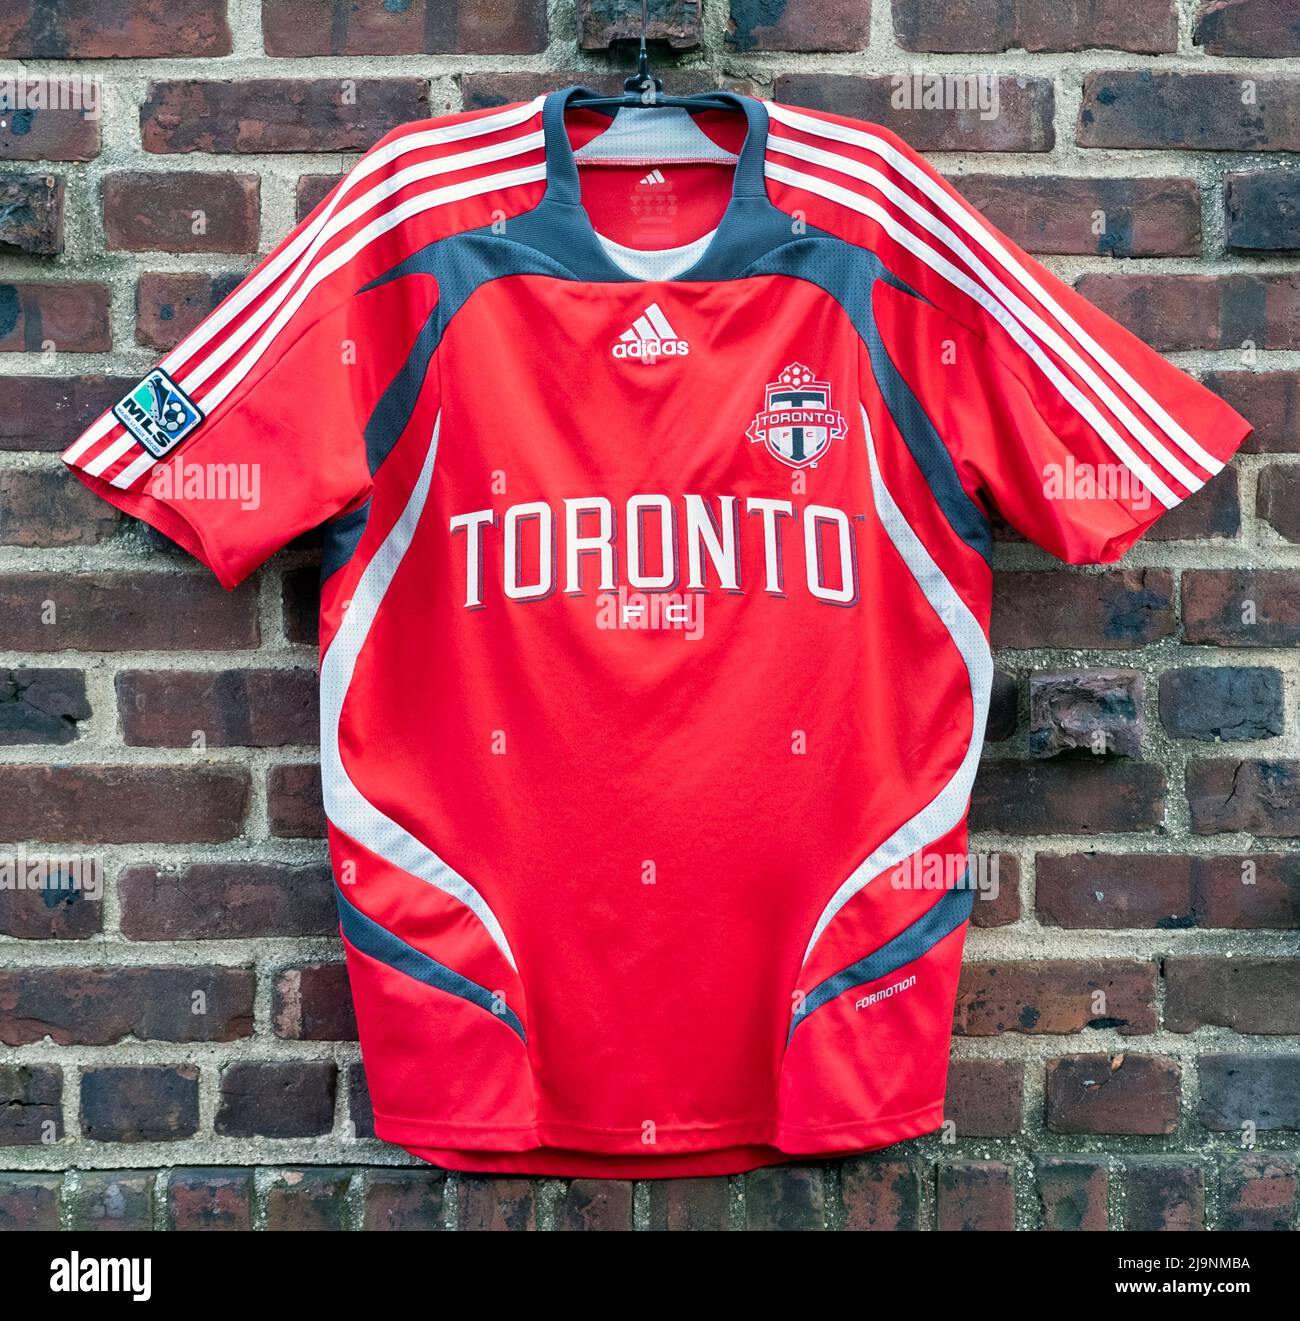 An authentic Adidas 2008 soccer jersey for Toronto FC, the Toronto Football club of the MLS, Major League Soccer.. Stock Photo